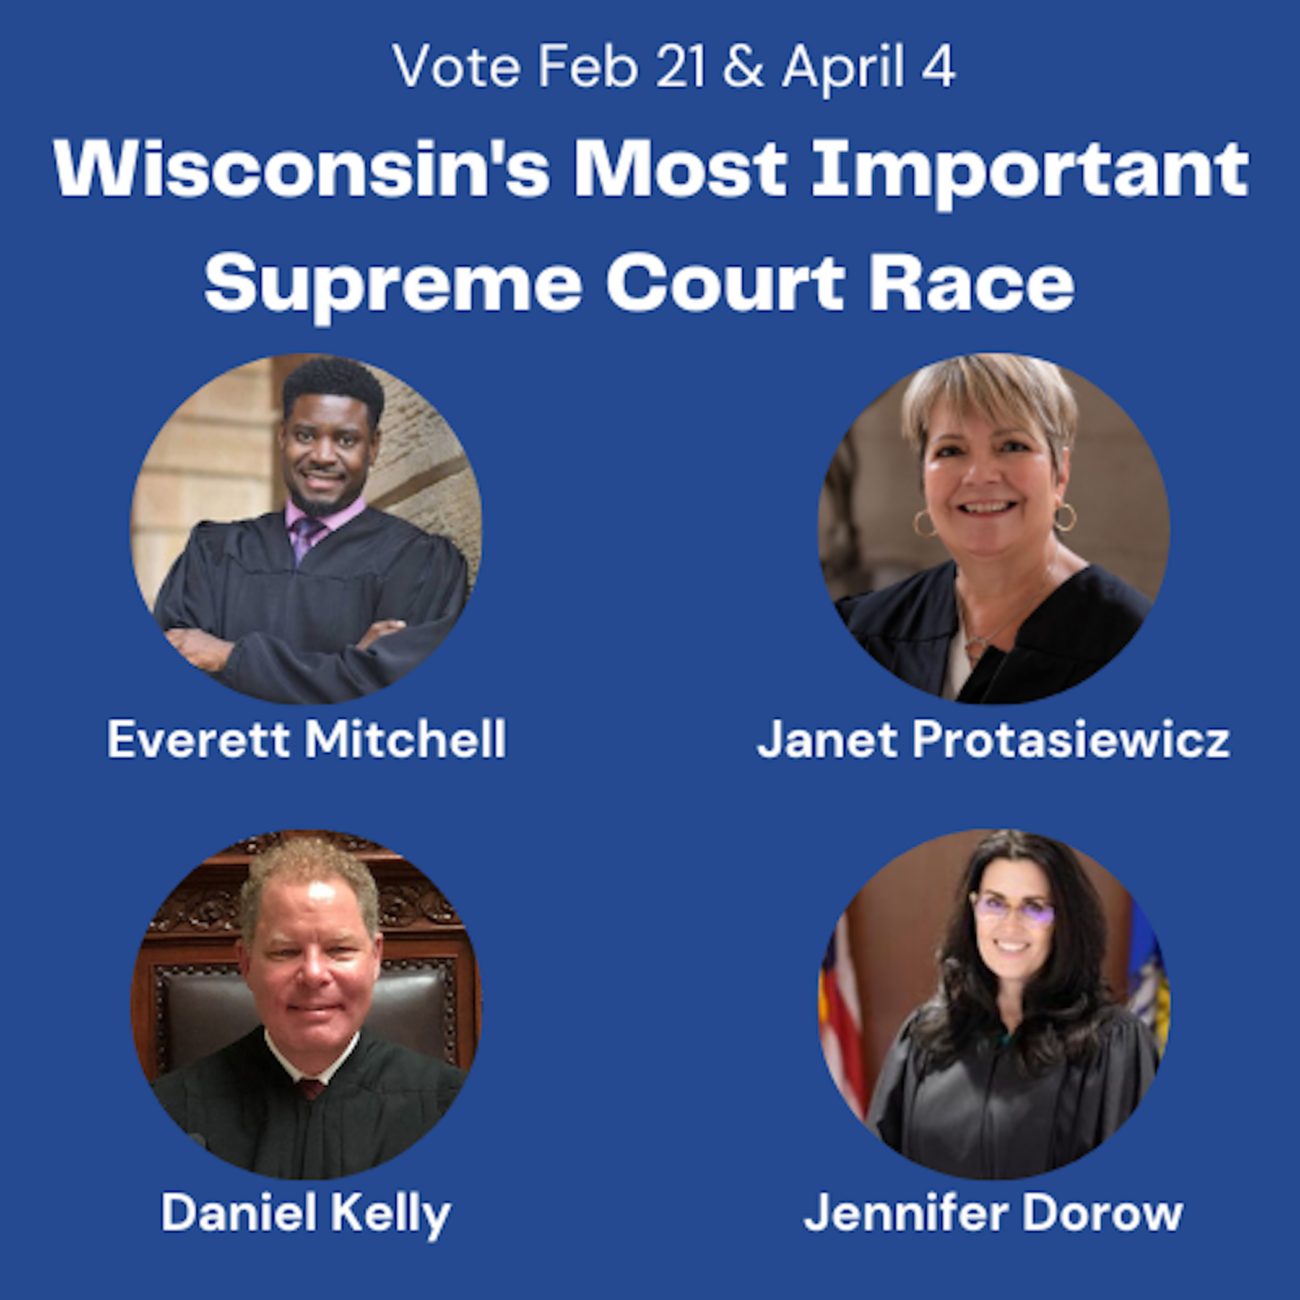 Blue banner with pictures of the 4 candidates for WI Supreme Court next to text that reads "Vote Feb 21 & April 4" and "Wisconsin's most important Supreme Court Race"